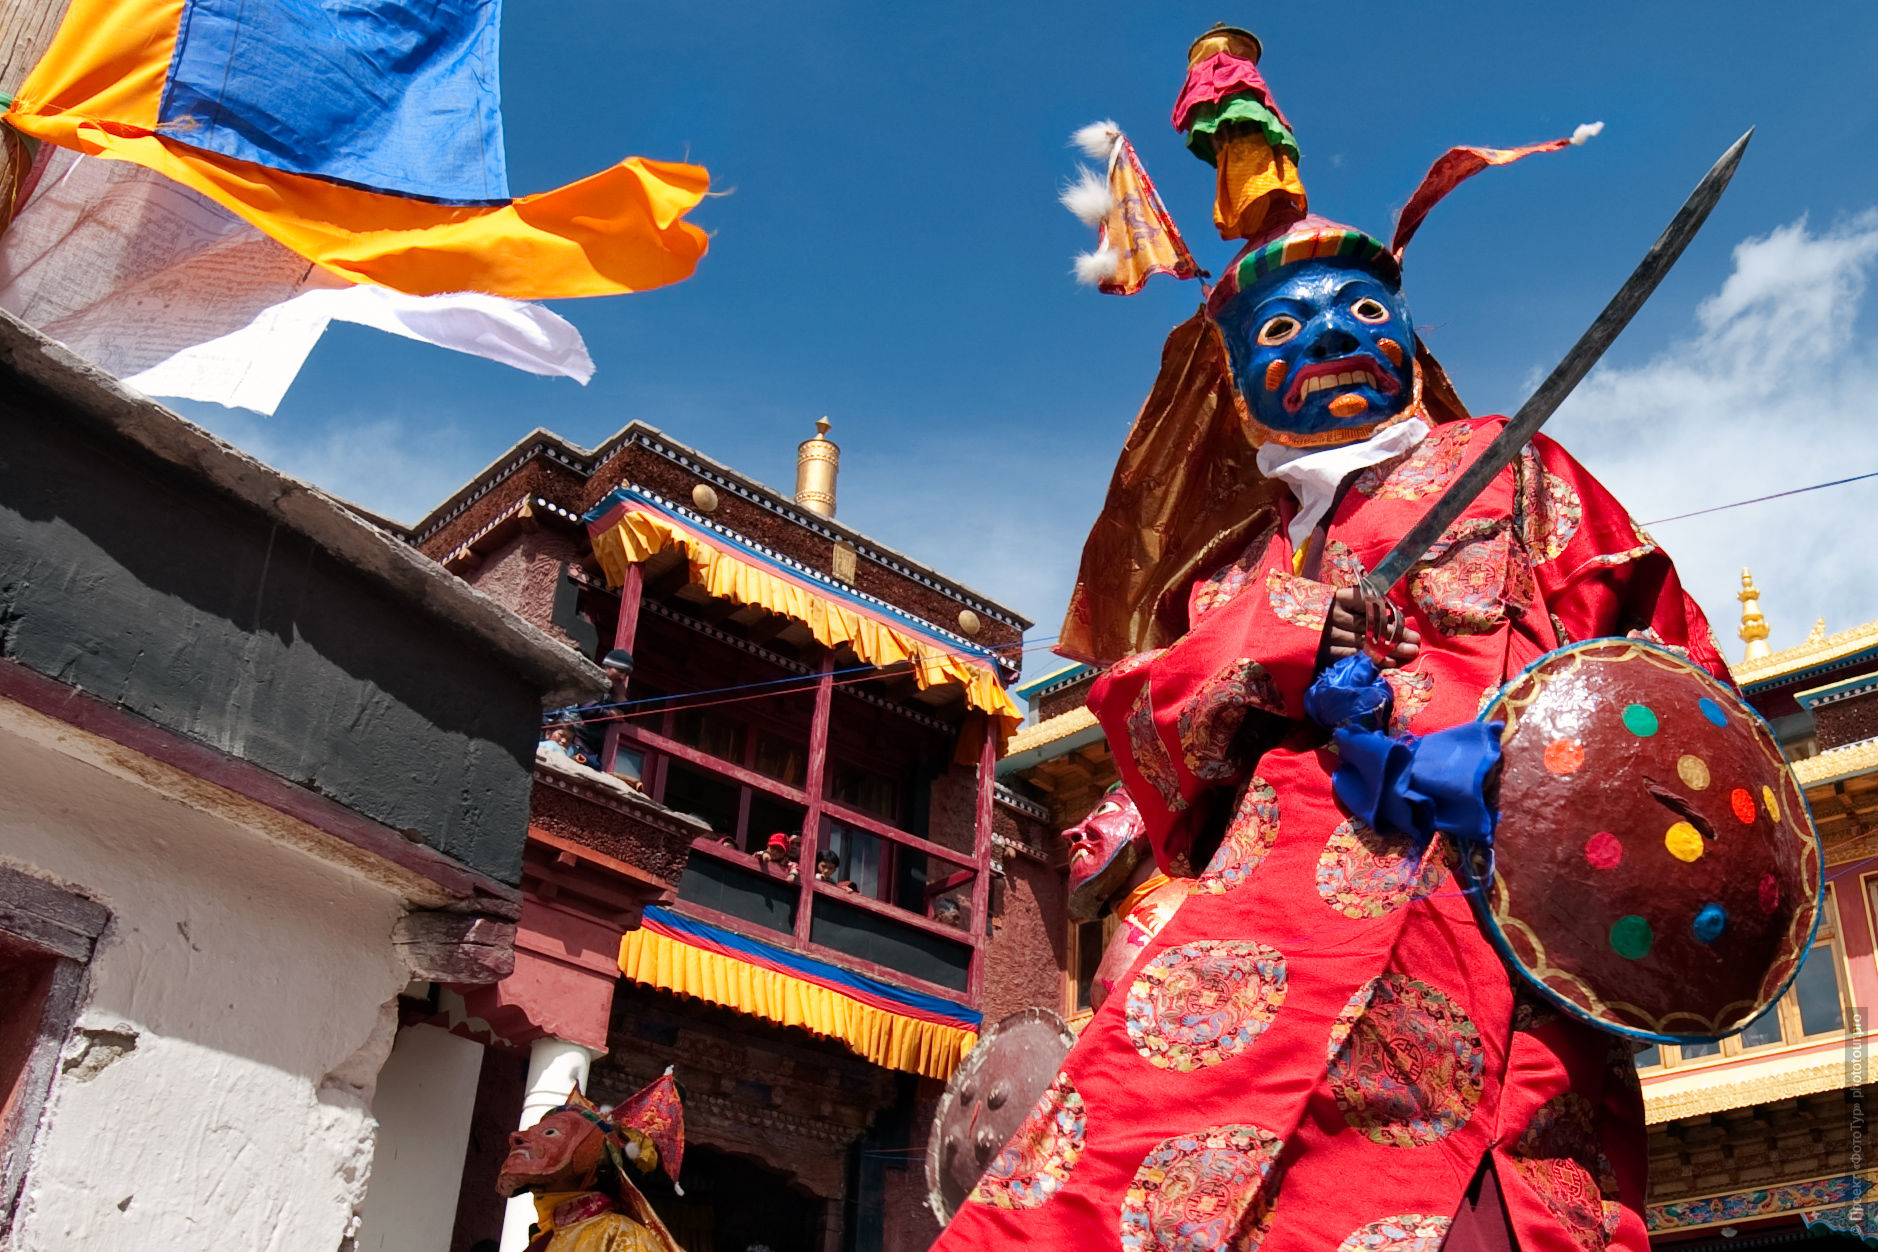 Dance Tsam in the monastery of Matho. Photo tour to Tibet for the Winter Mysteries in Ladakh, Stok and Matho monasteries, 01.03. - 03/10/2020